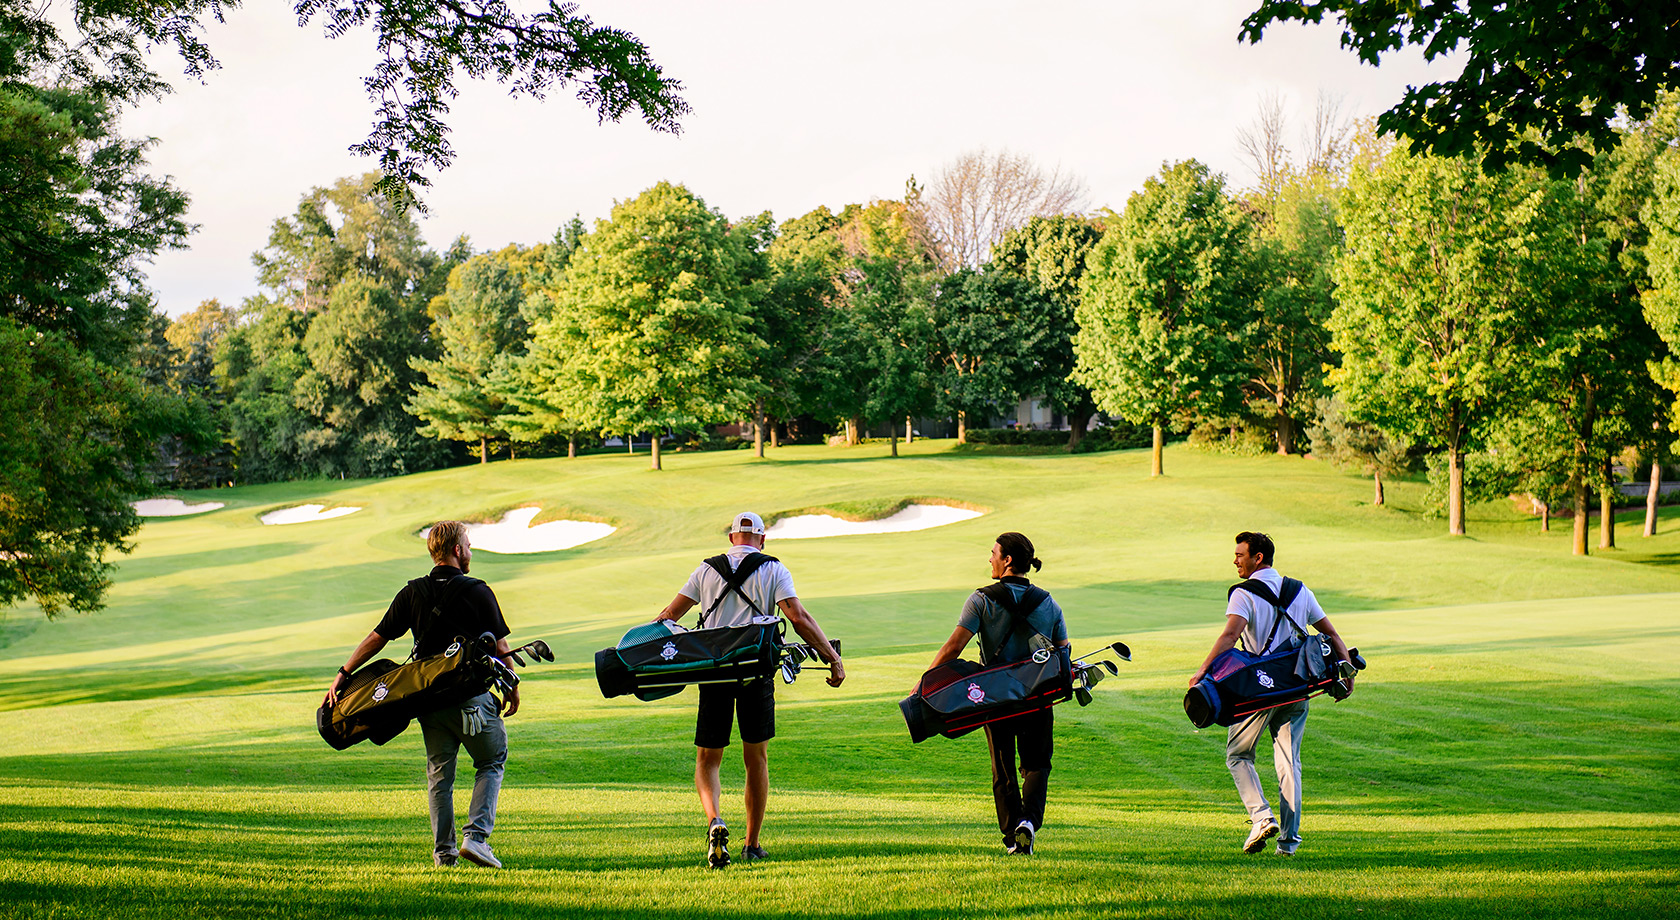 Players walking the golf course